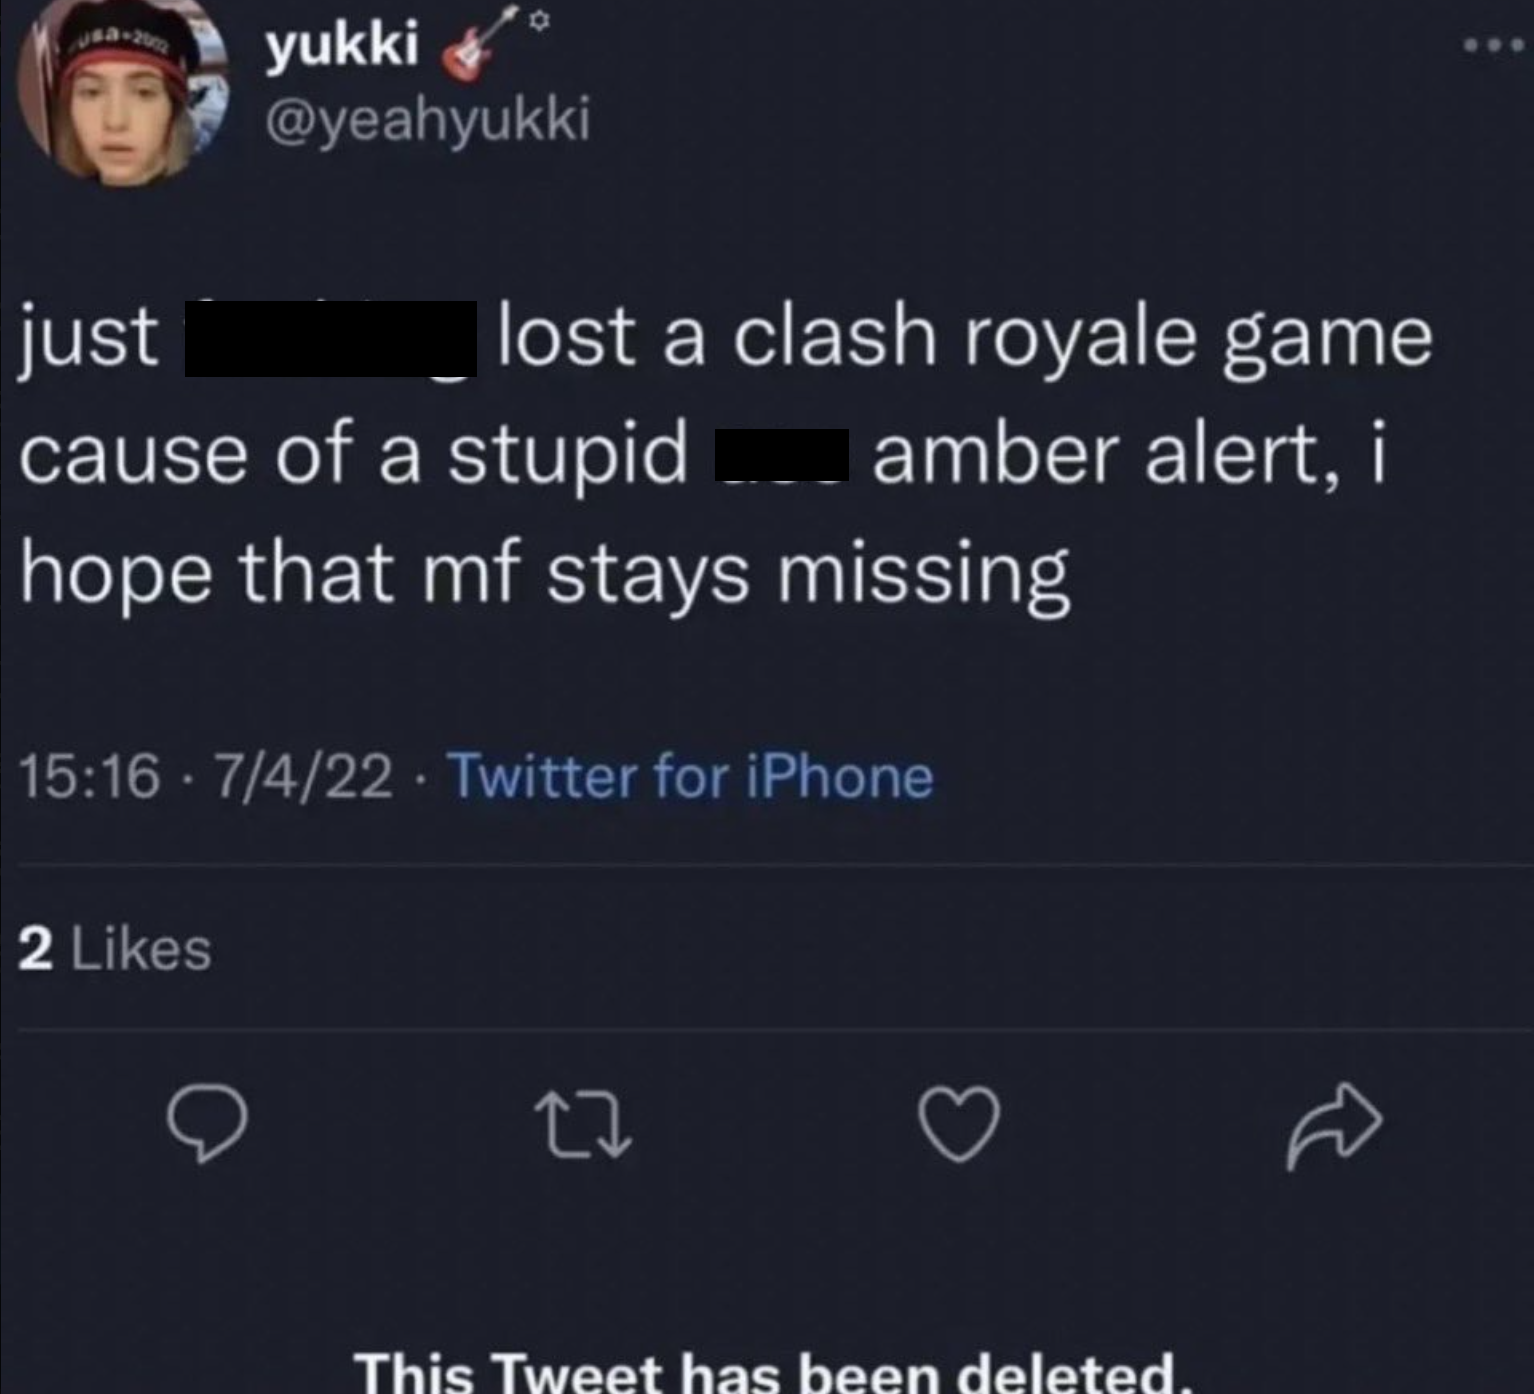 screenshot - just yukki lost a clash royale game cause of a stupid _ amber alert, i hope that mf stays missing 7422 Twitter for iPhone 2 27 This Tweet has been deleted.